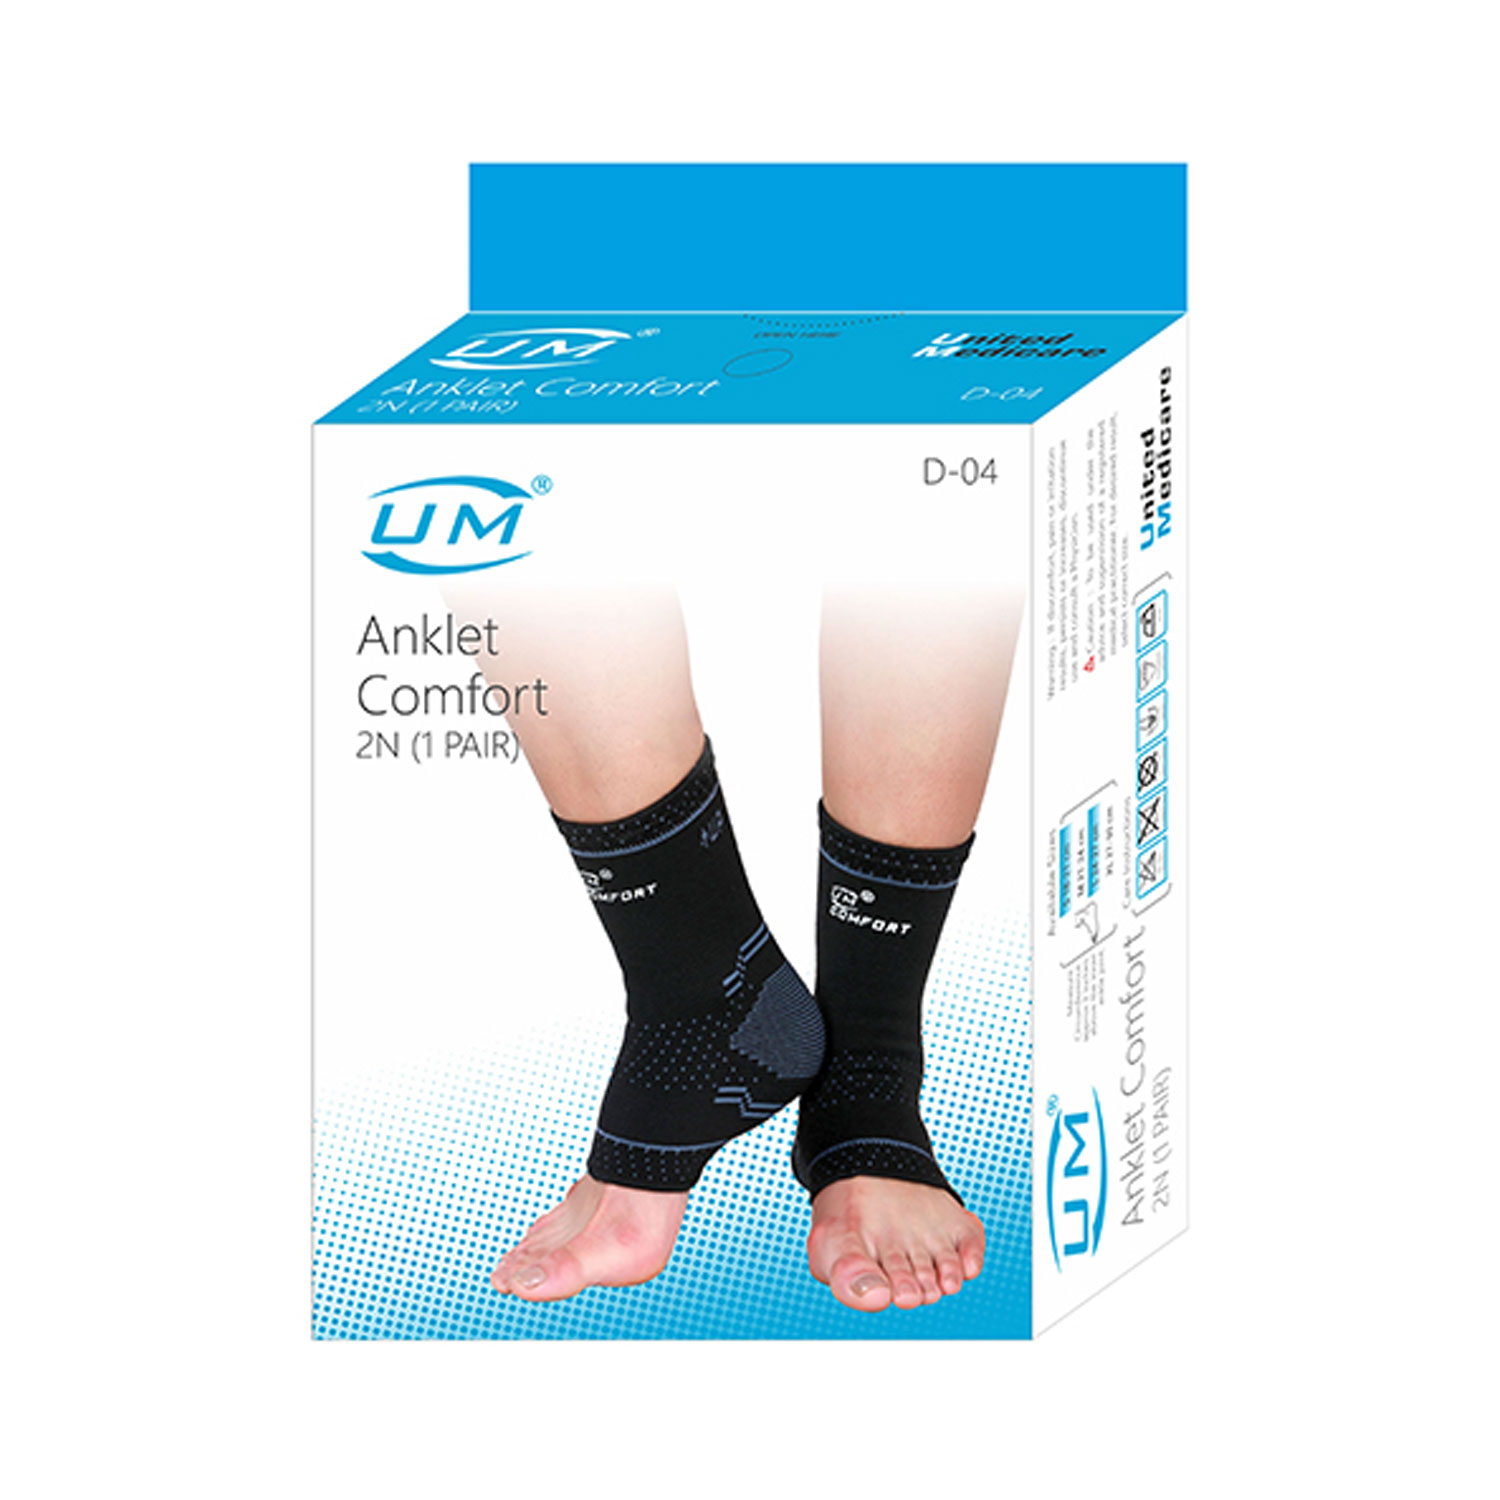 Pain Relief Products: Buy Knee Braces, Supports & Splints Online